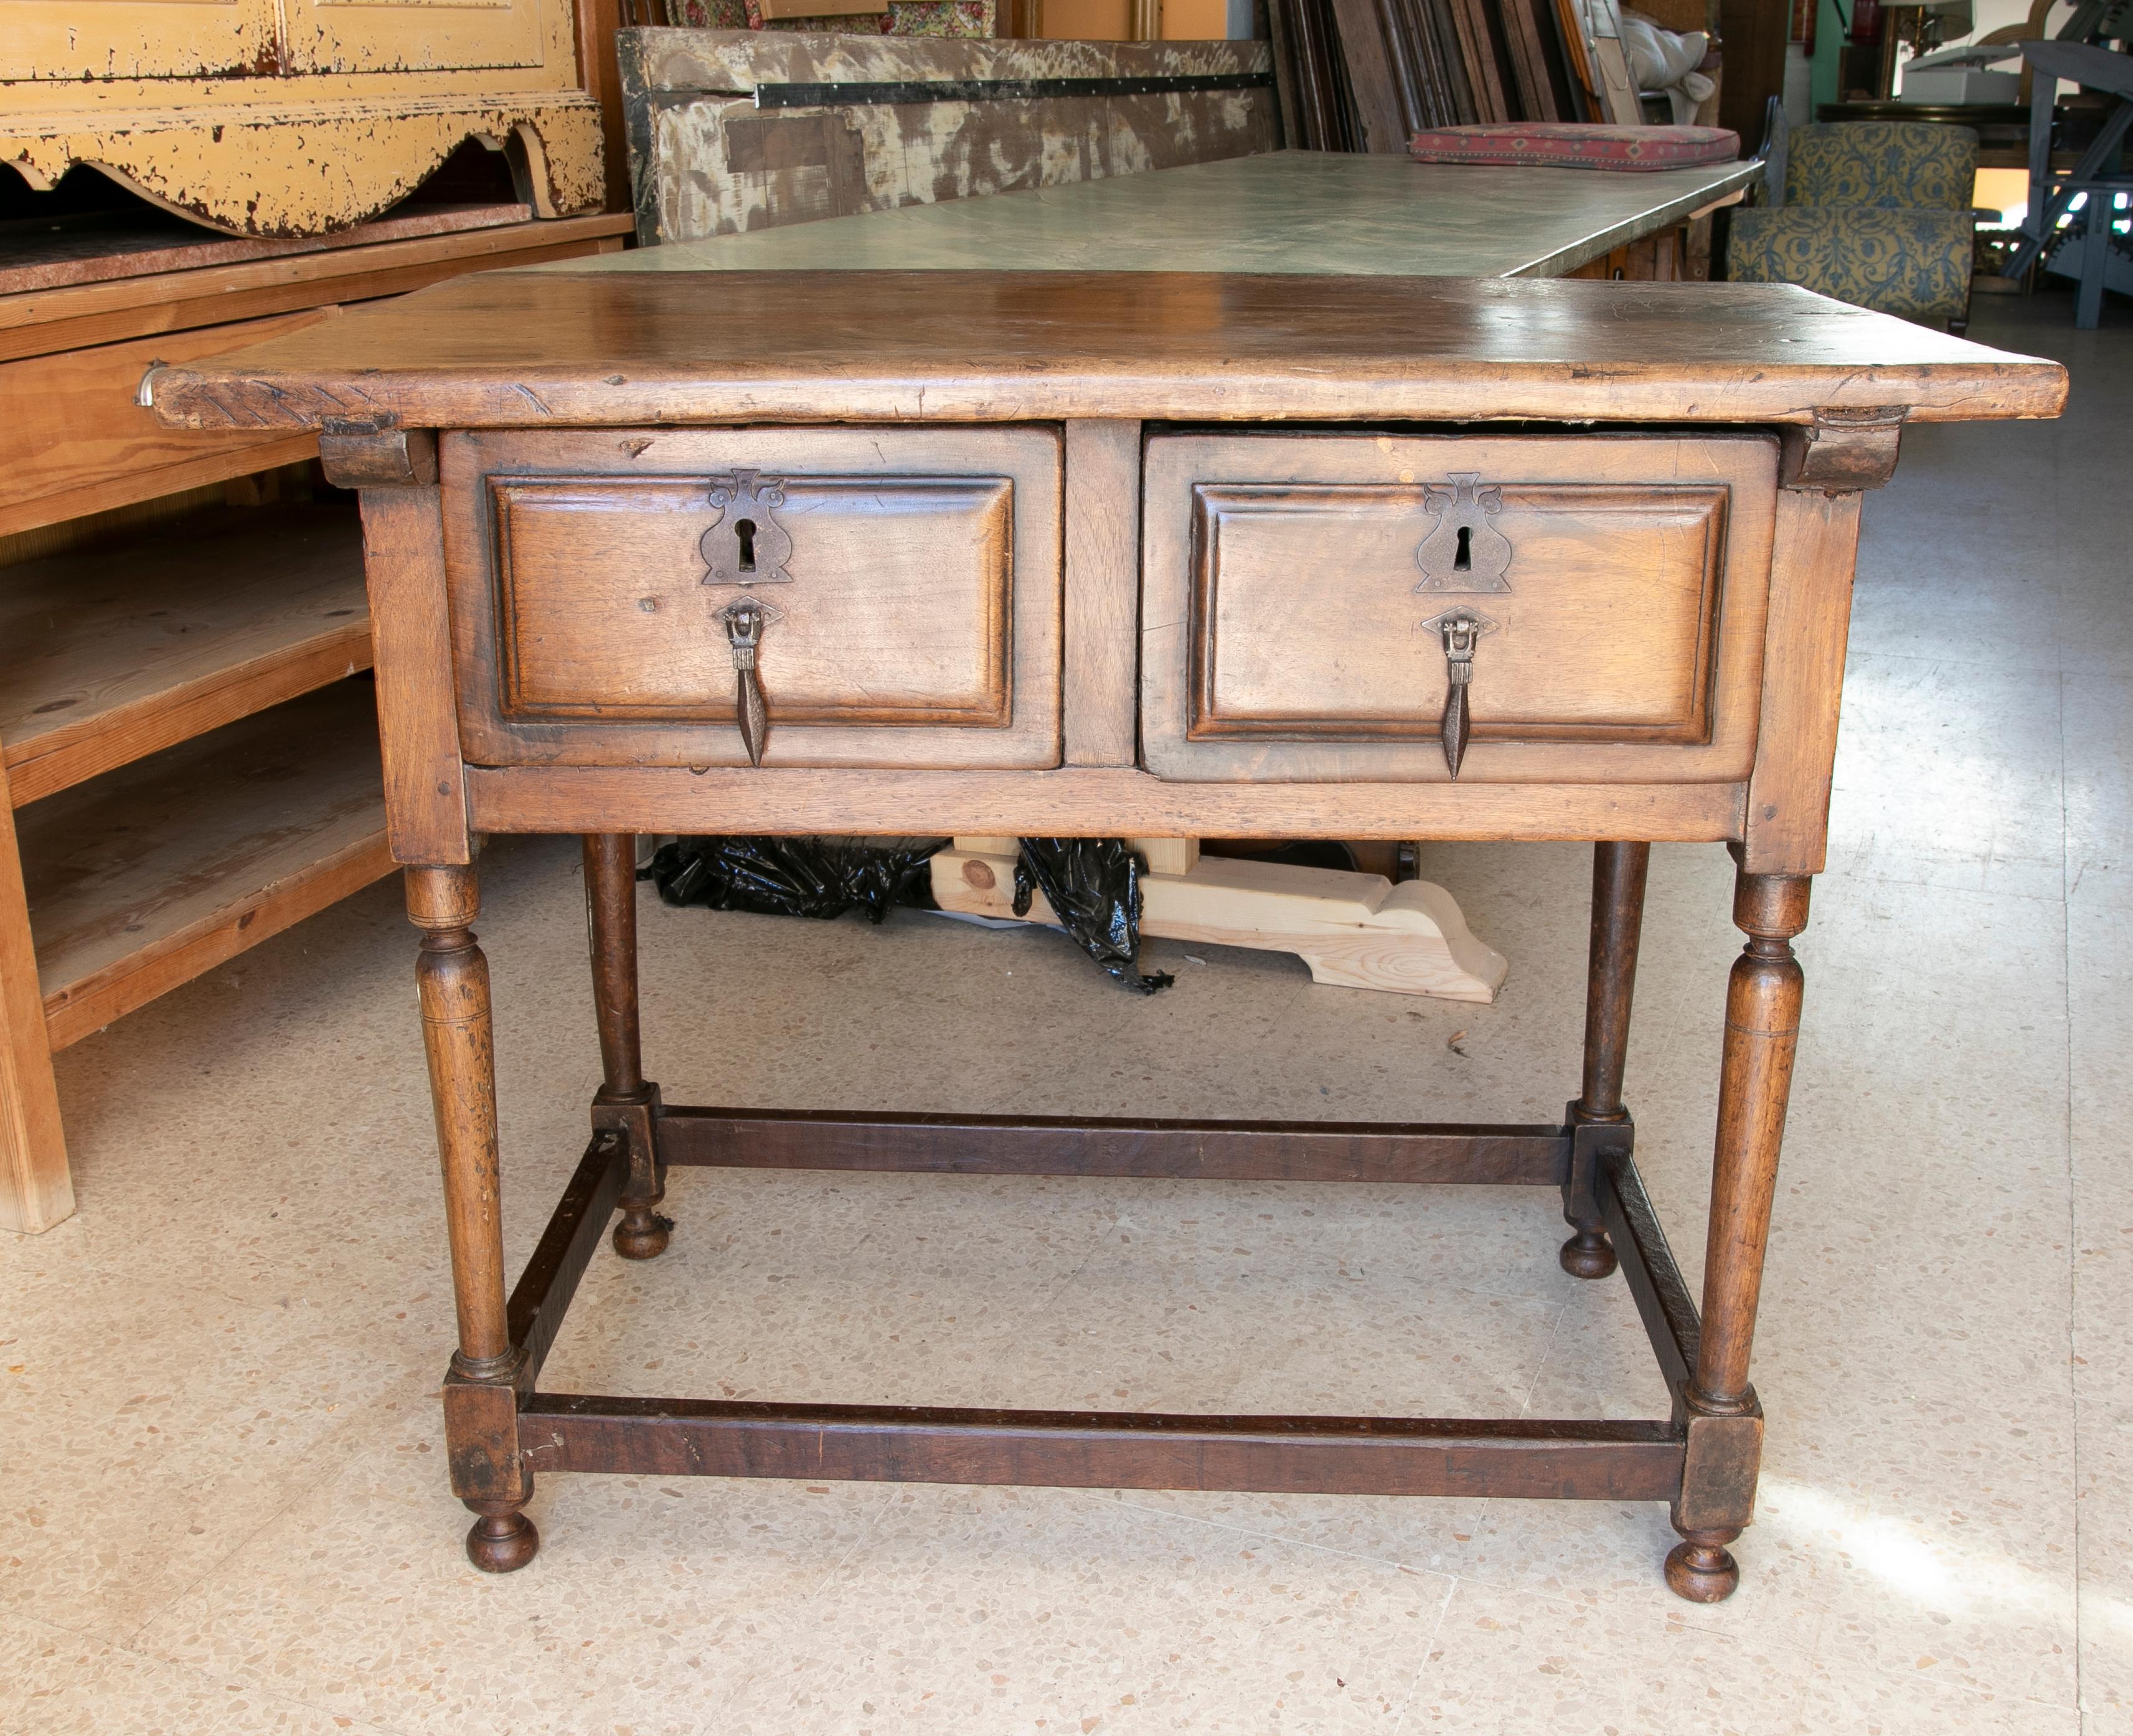 18th century walnut writing table with two drawers and antique fittings.